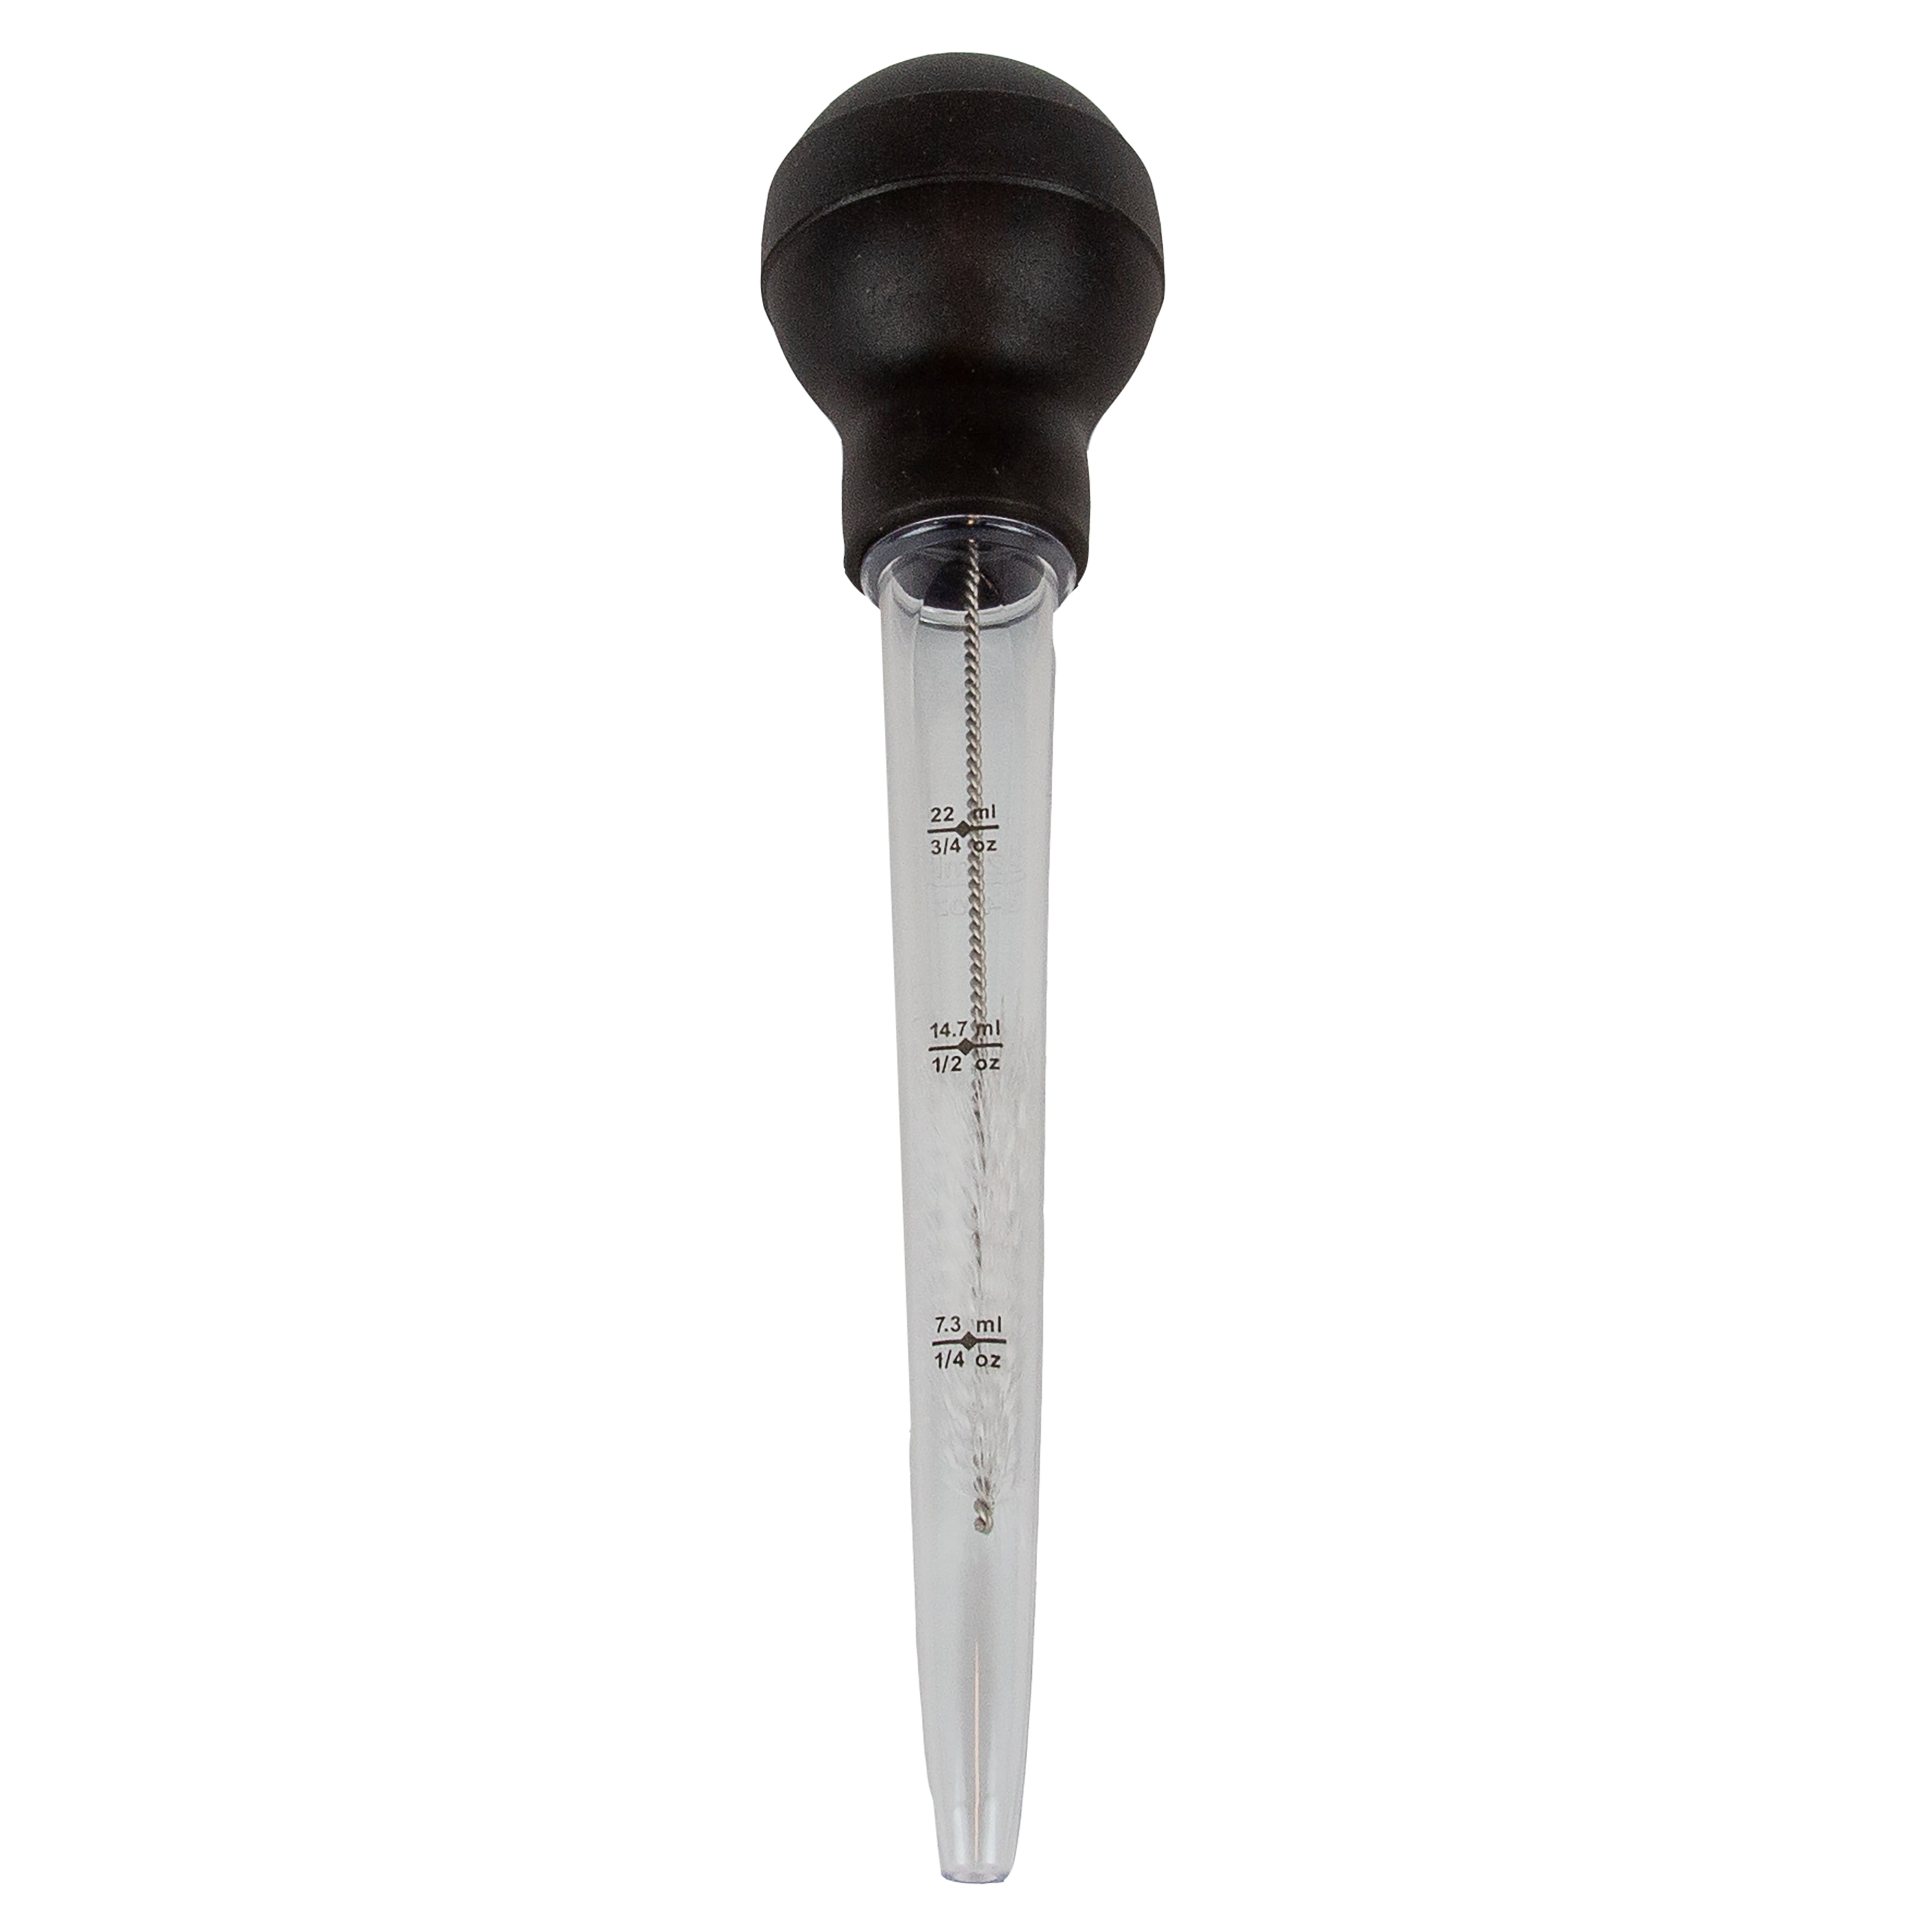 Mainstays Baster with Cleaning Brush with Dual Measurement Marks Made from SAN, TPR, Nylon and Steel